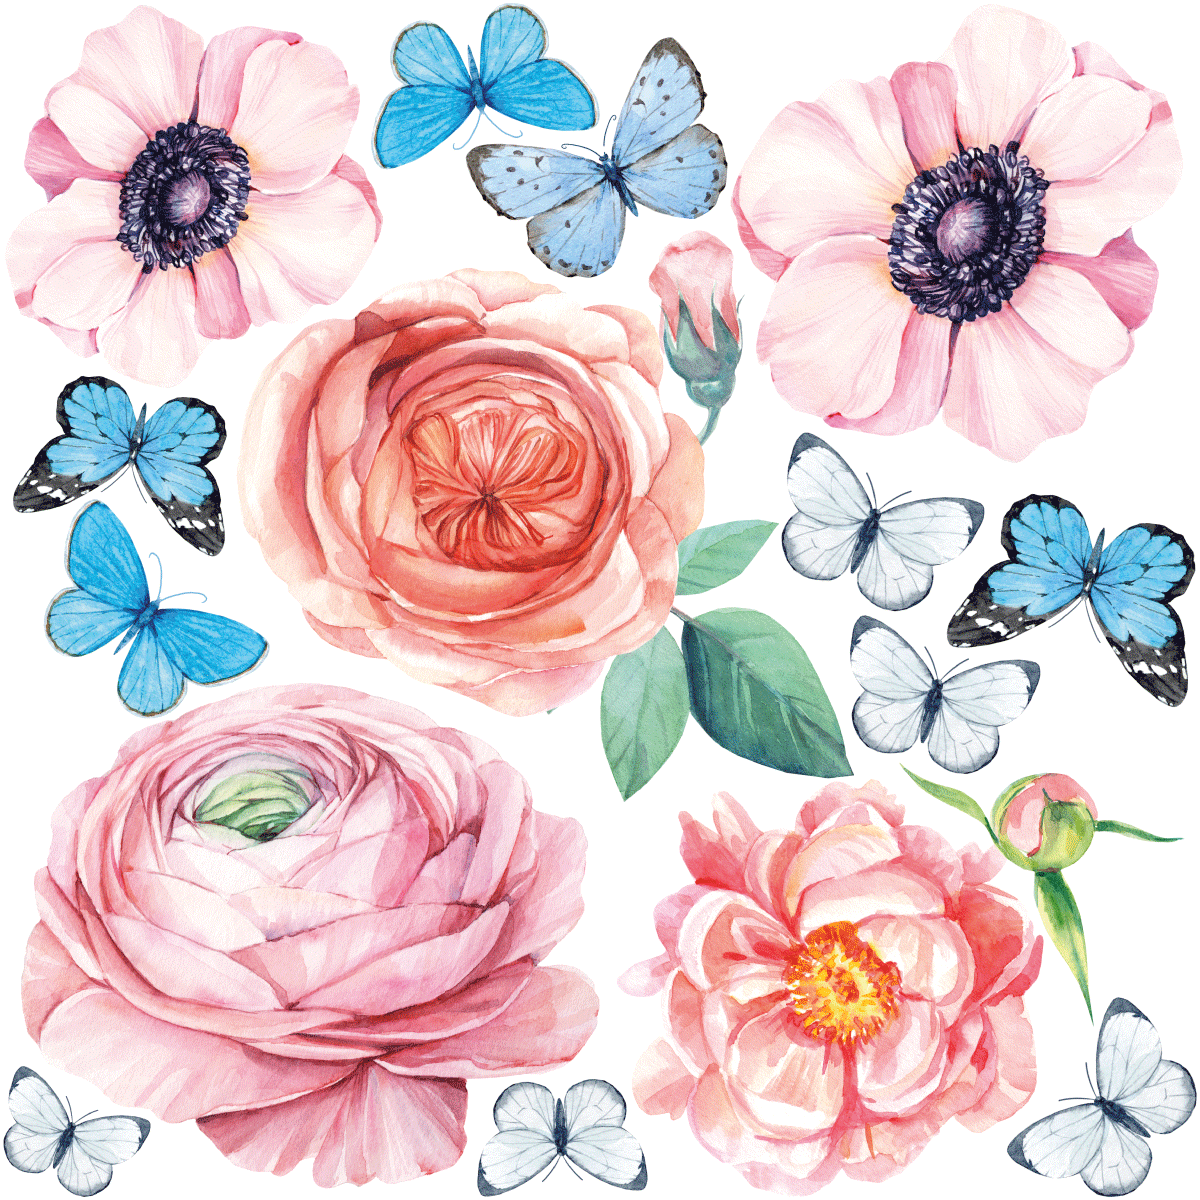 https://www.ambiance-sticker.com/images/Image/stickers-fleurs-roses-amies-des-papillons-ambiance-sticker-col-inc-ROS-C431.png